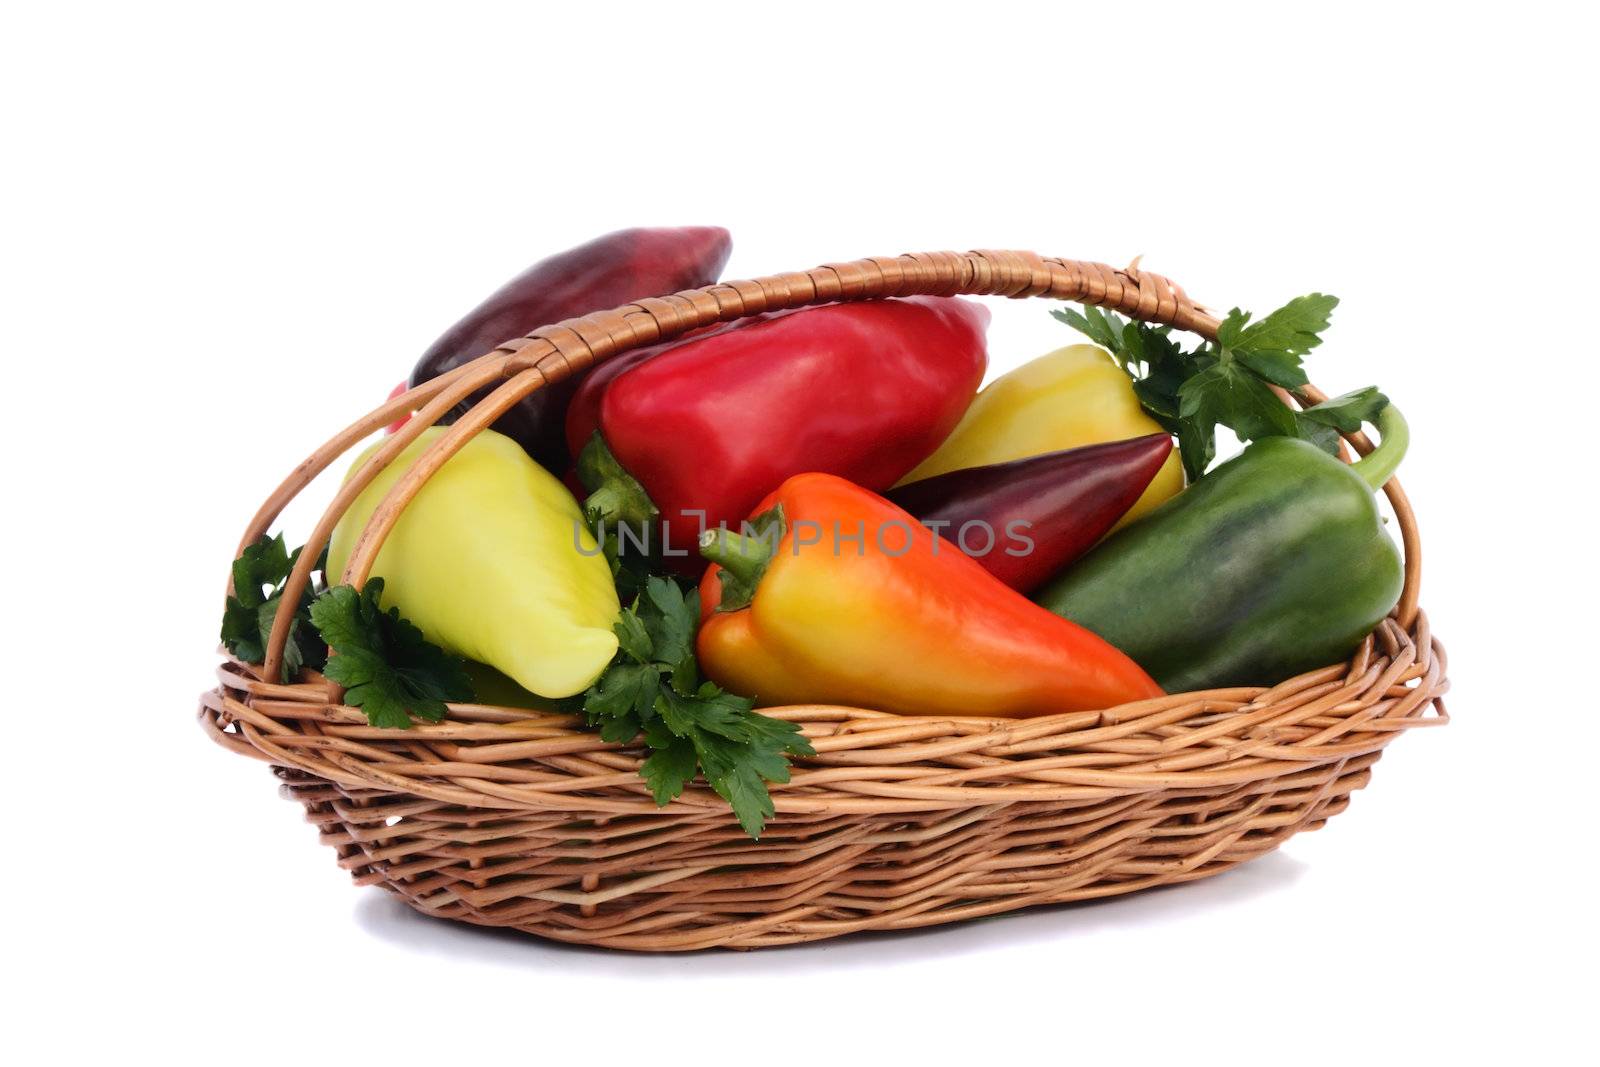 Wicker basket filled with ripe red, yellow, green peppers. Presented on a white background.